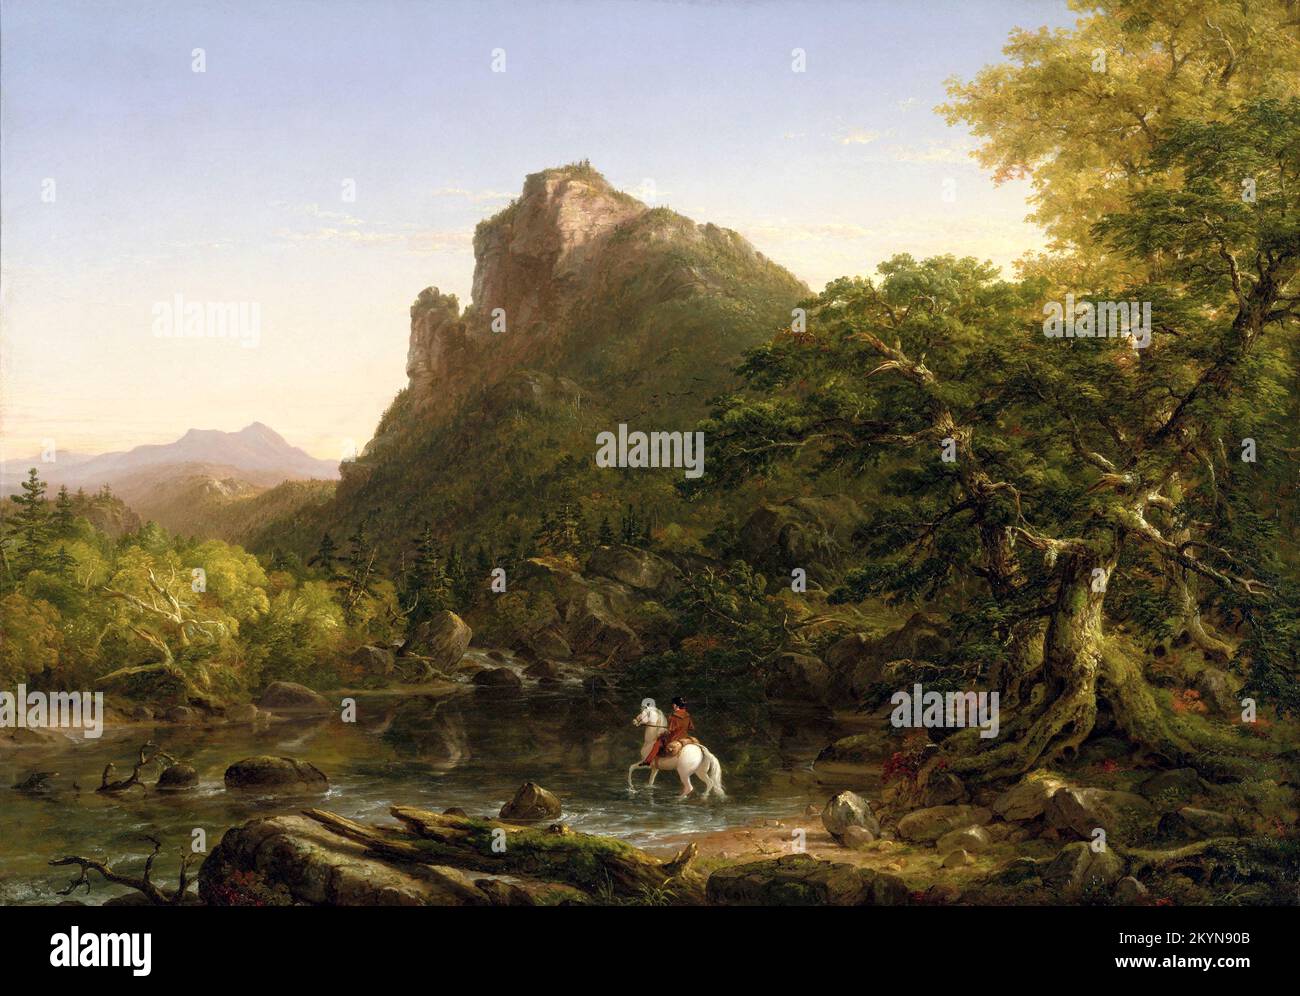 The Moutain Ford by Thomas Cole (1801-1848), oil on canvas, 1846 Stock Photo